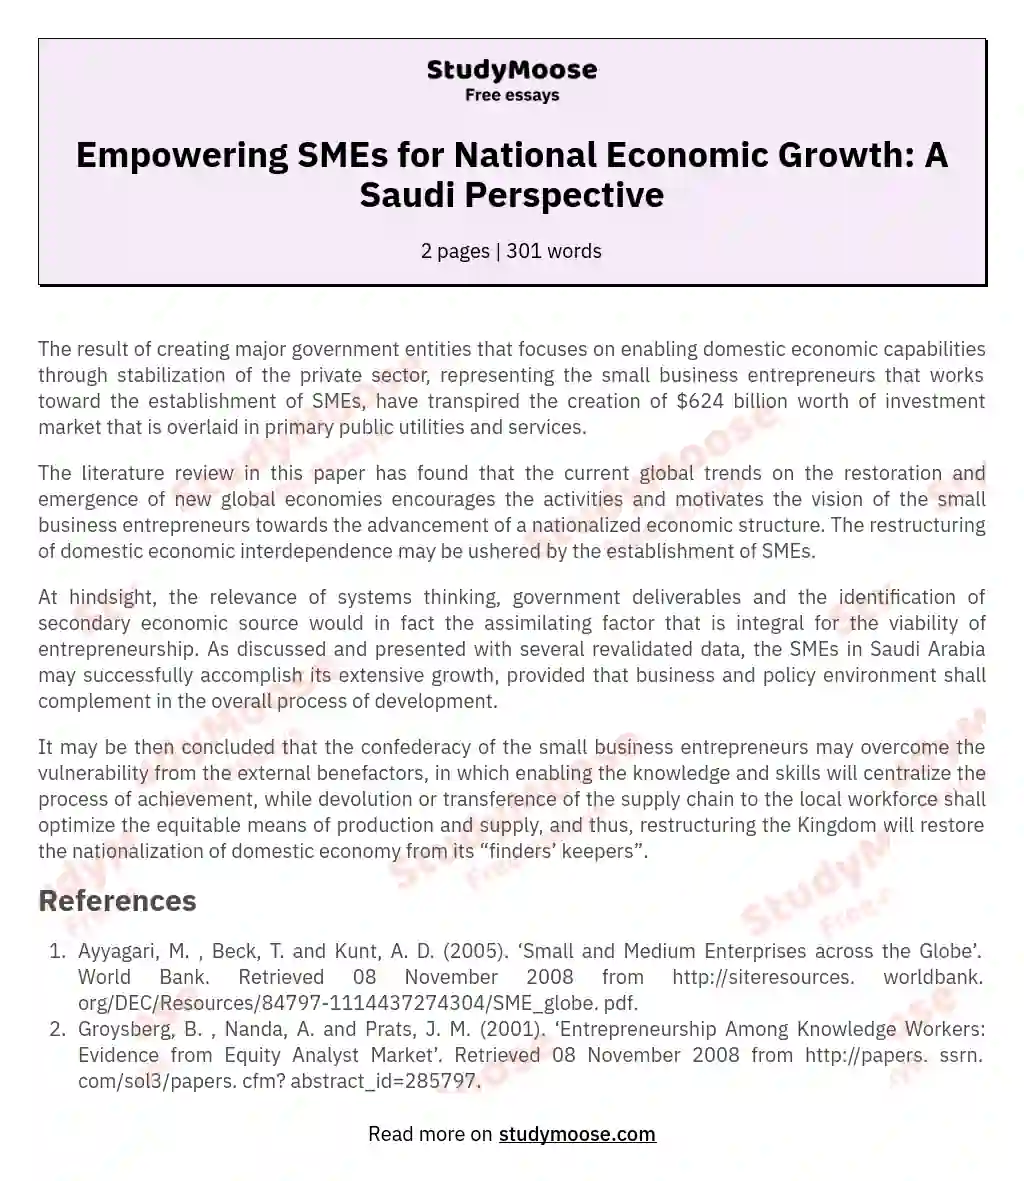 Empowering SMEs for National Economic Growth: A Saudi Perspective essay